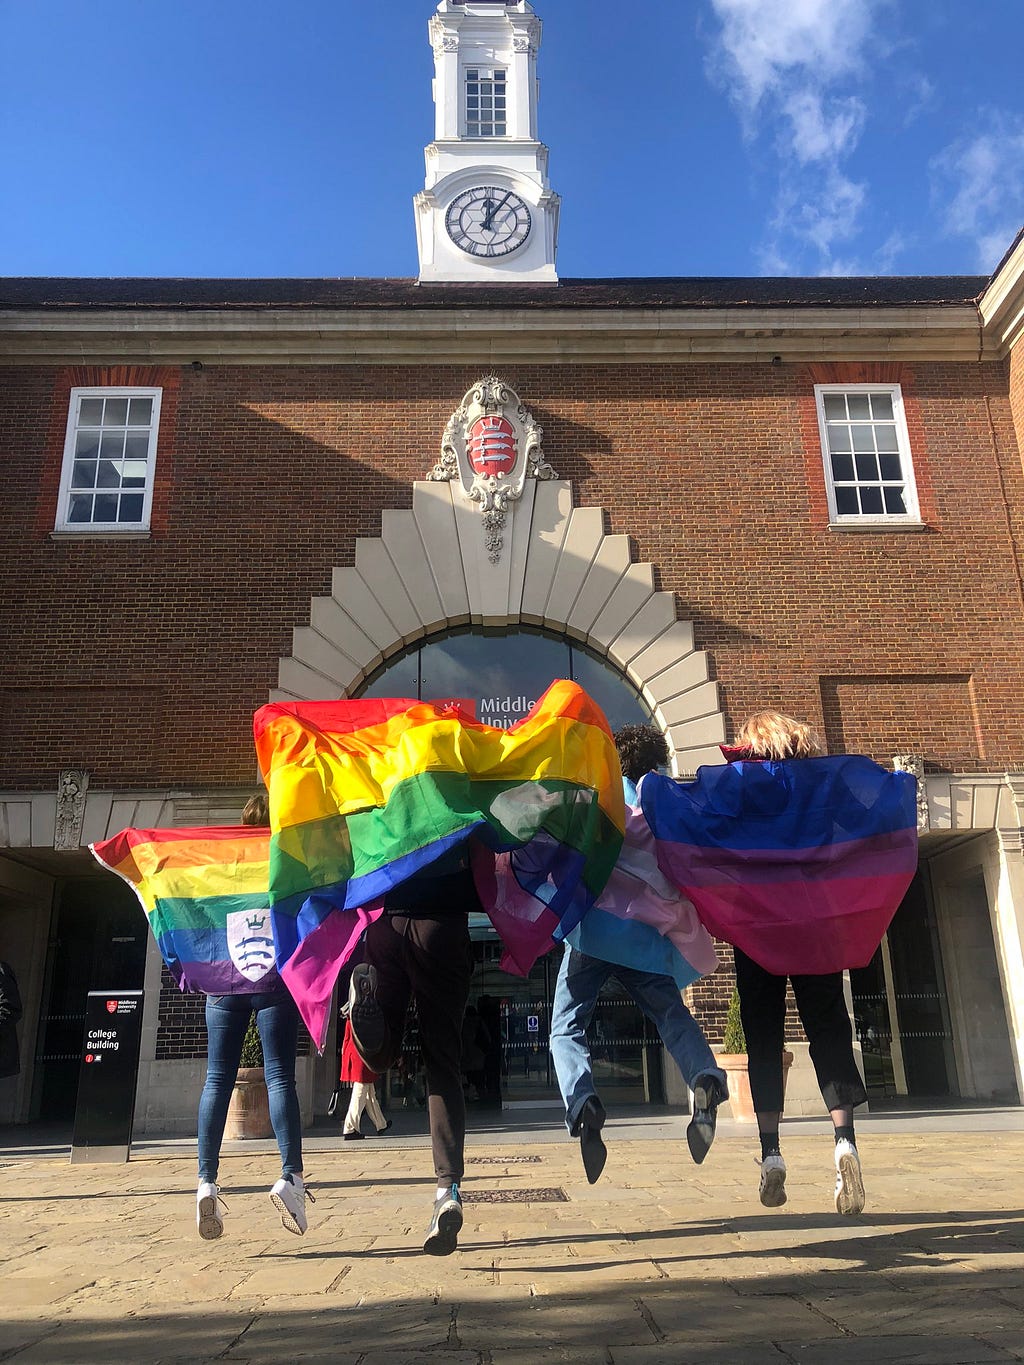 Students with LGBT+ pride flags jumping outside Middlesex University